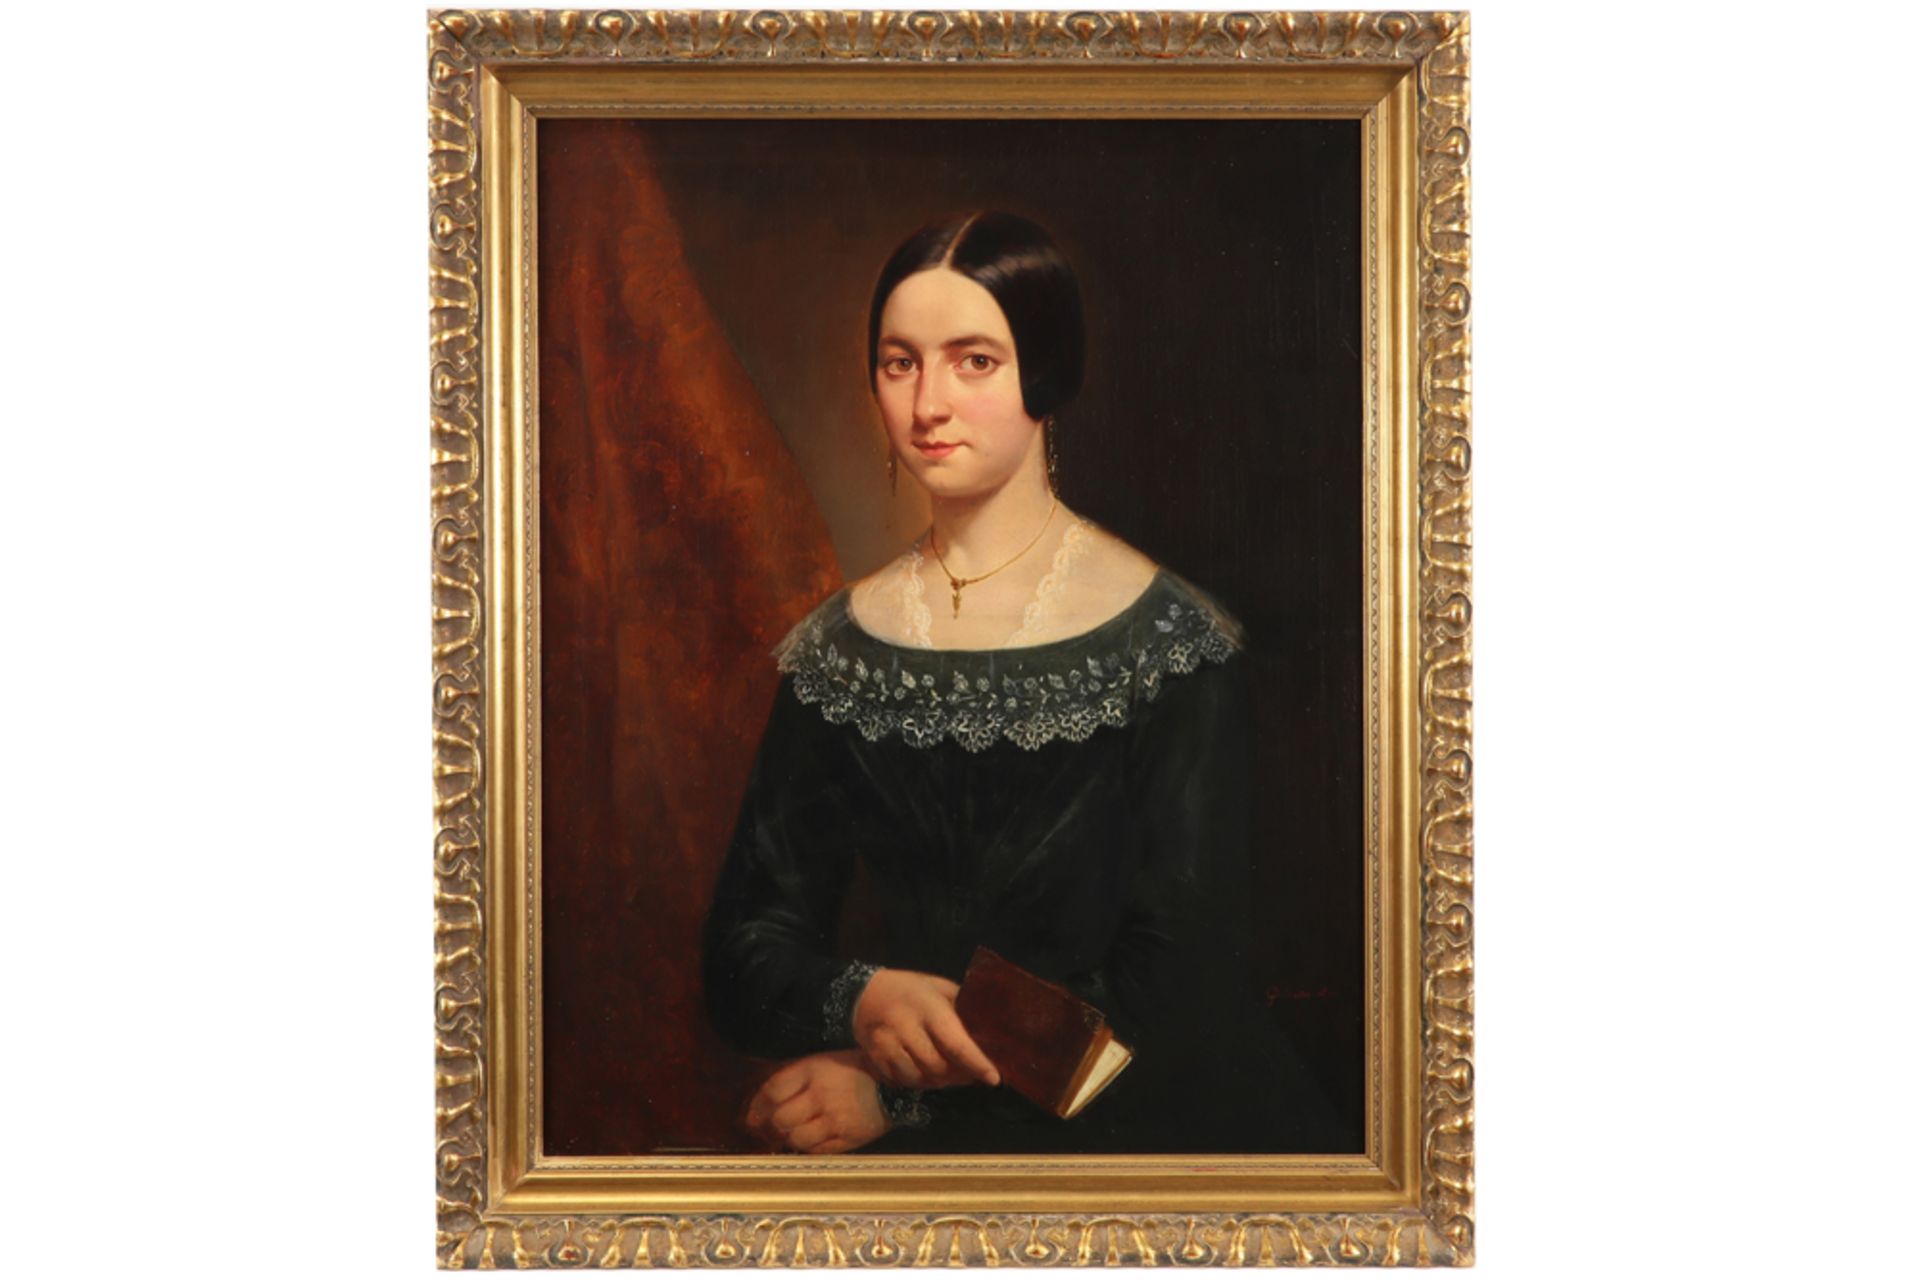 19th Cent. oil on canvas - signed Jacques Louis Godinau and dated 1844 ||GODINAU JACQUES LOUIS (1811 - Image 3 of 4